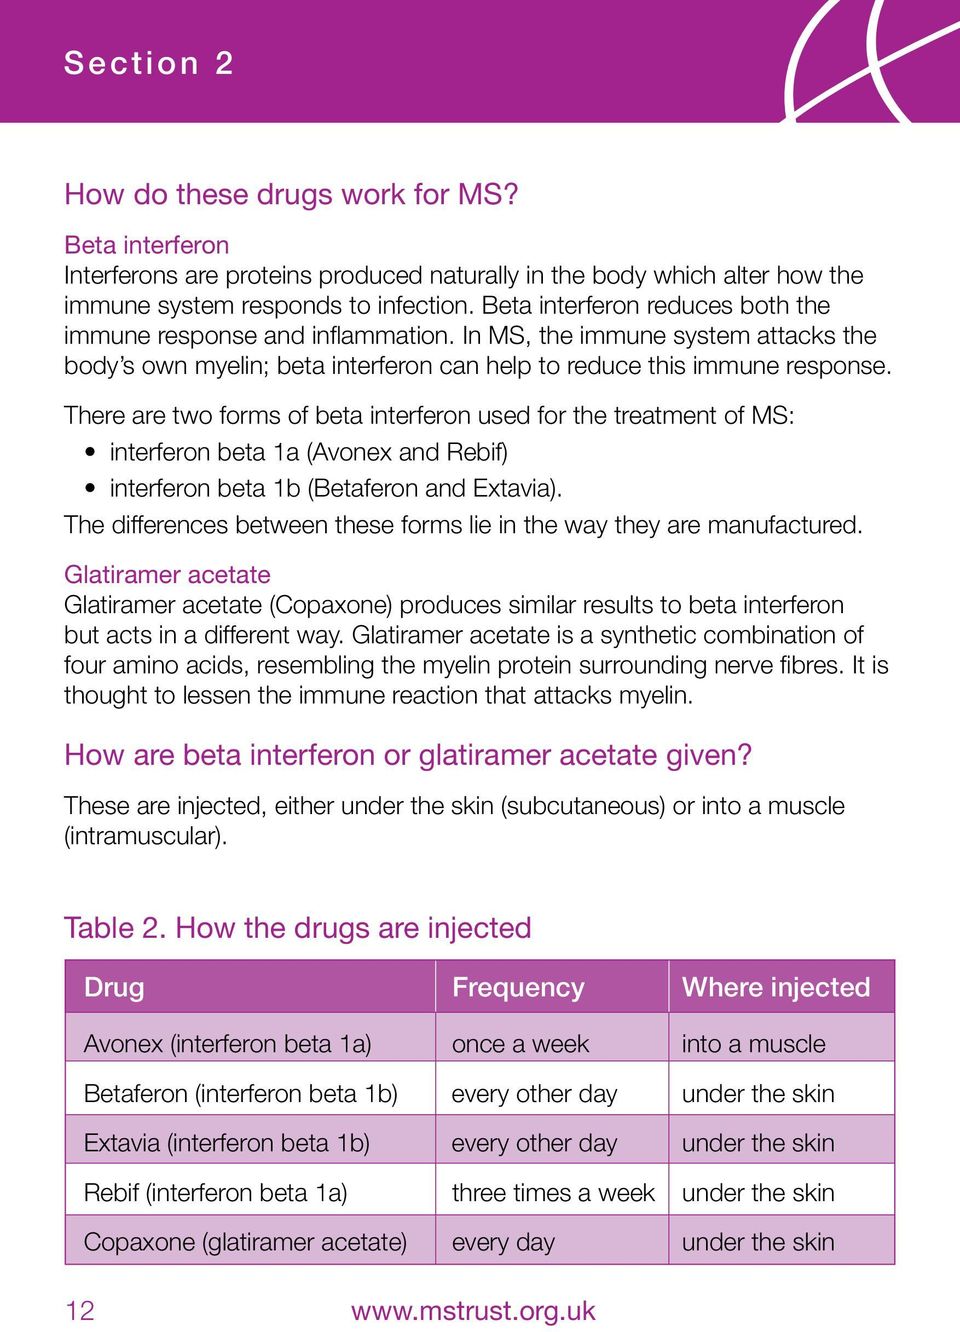 There are two forms of beta interferon used for the treatment of MS: interferon beta 1a (Avonex and Rebif) interferon beta 1b (Betaferon and Extavia).